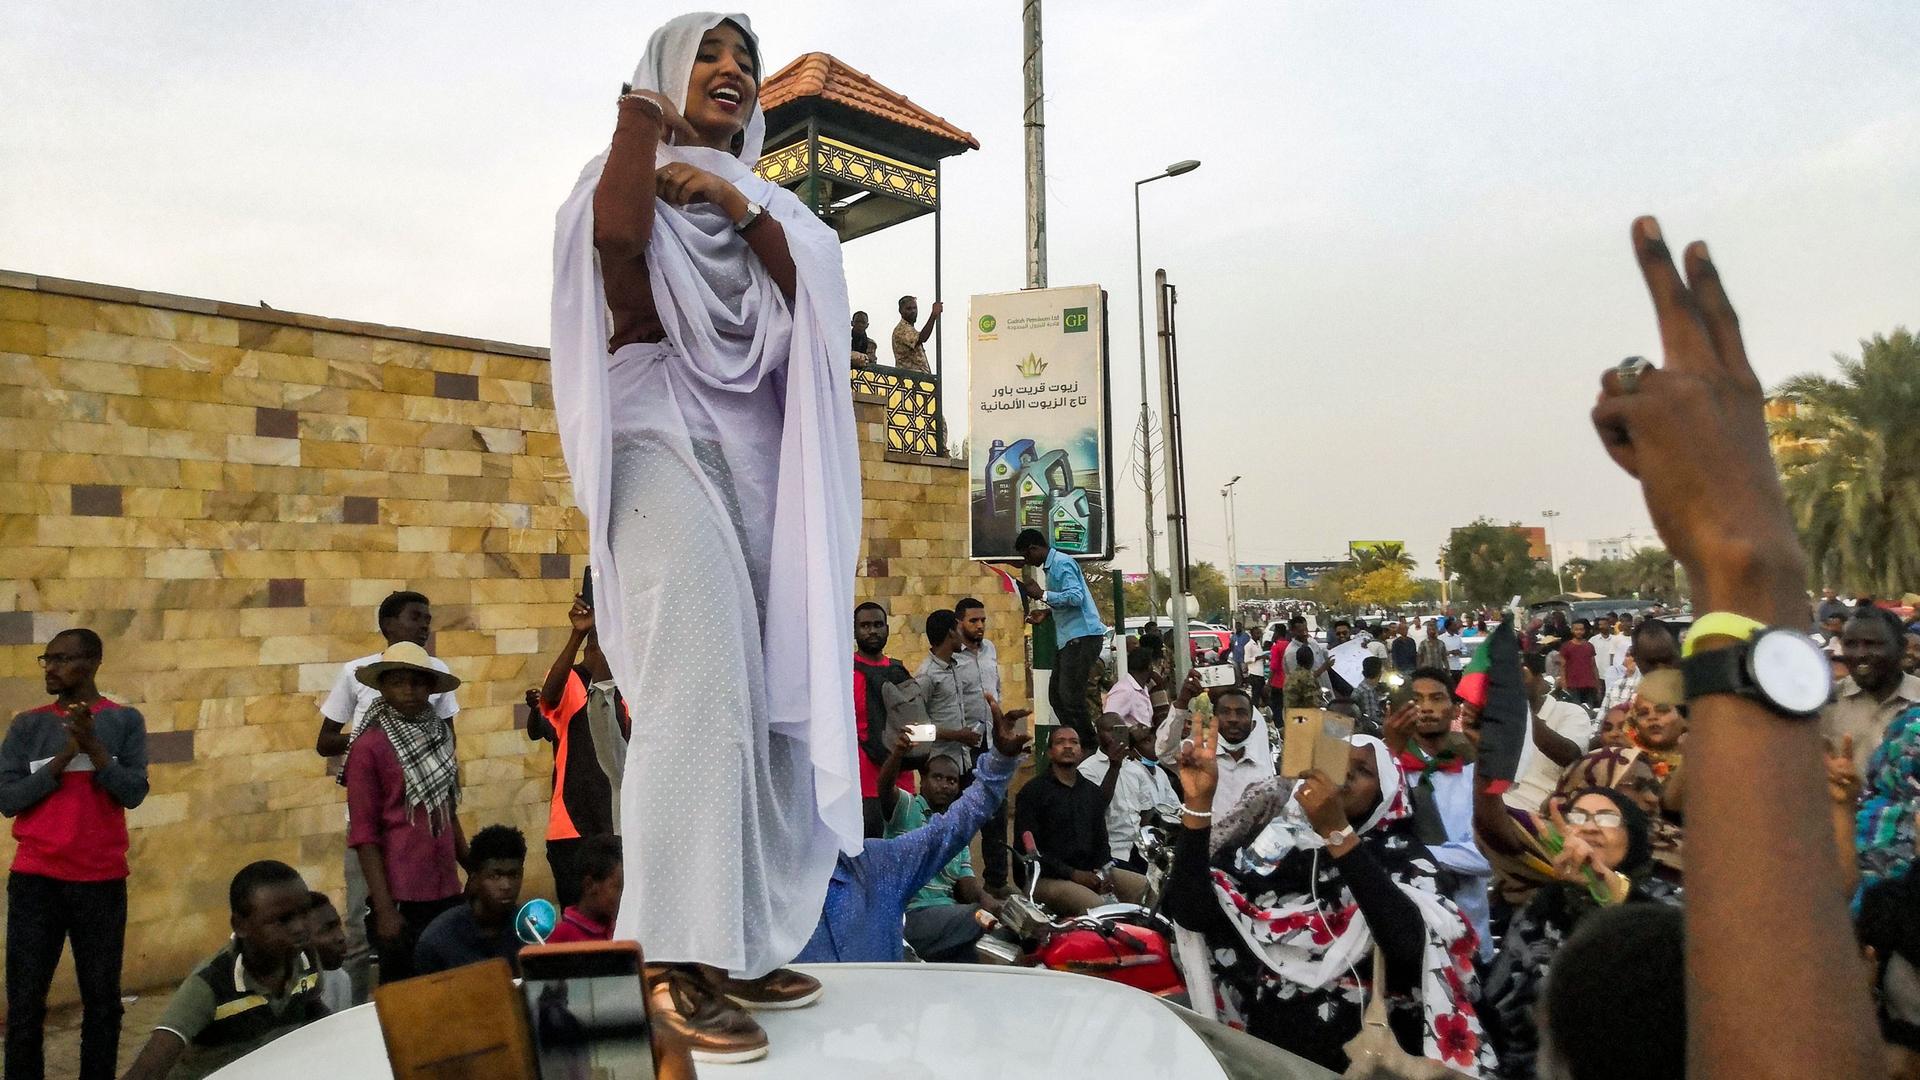 A woman stands atop a car and speaks to a crowd